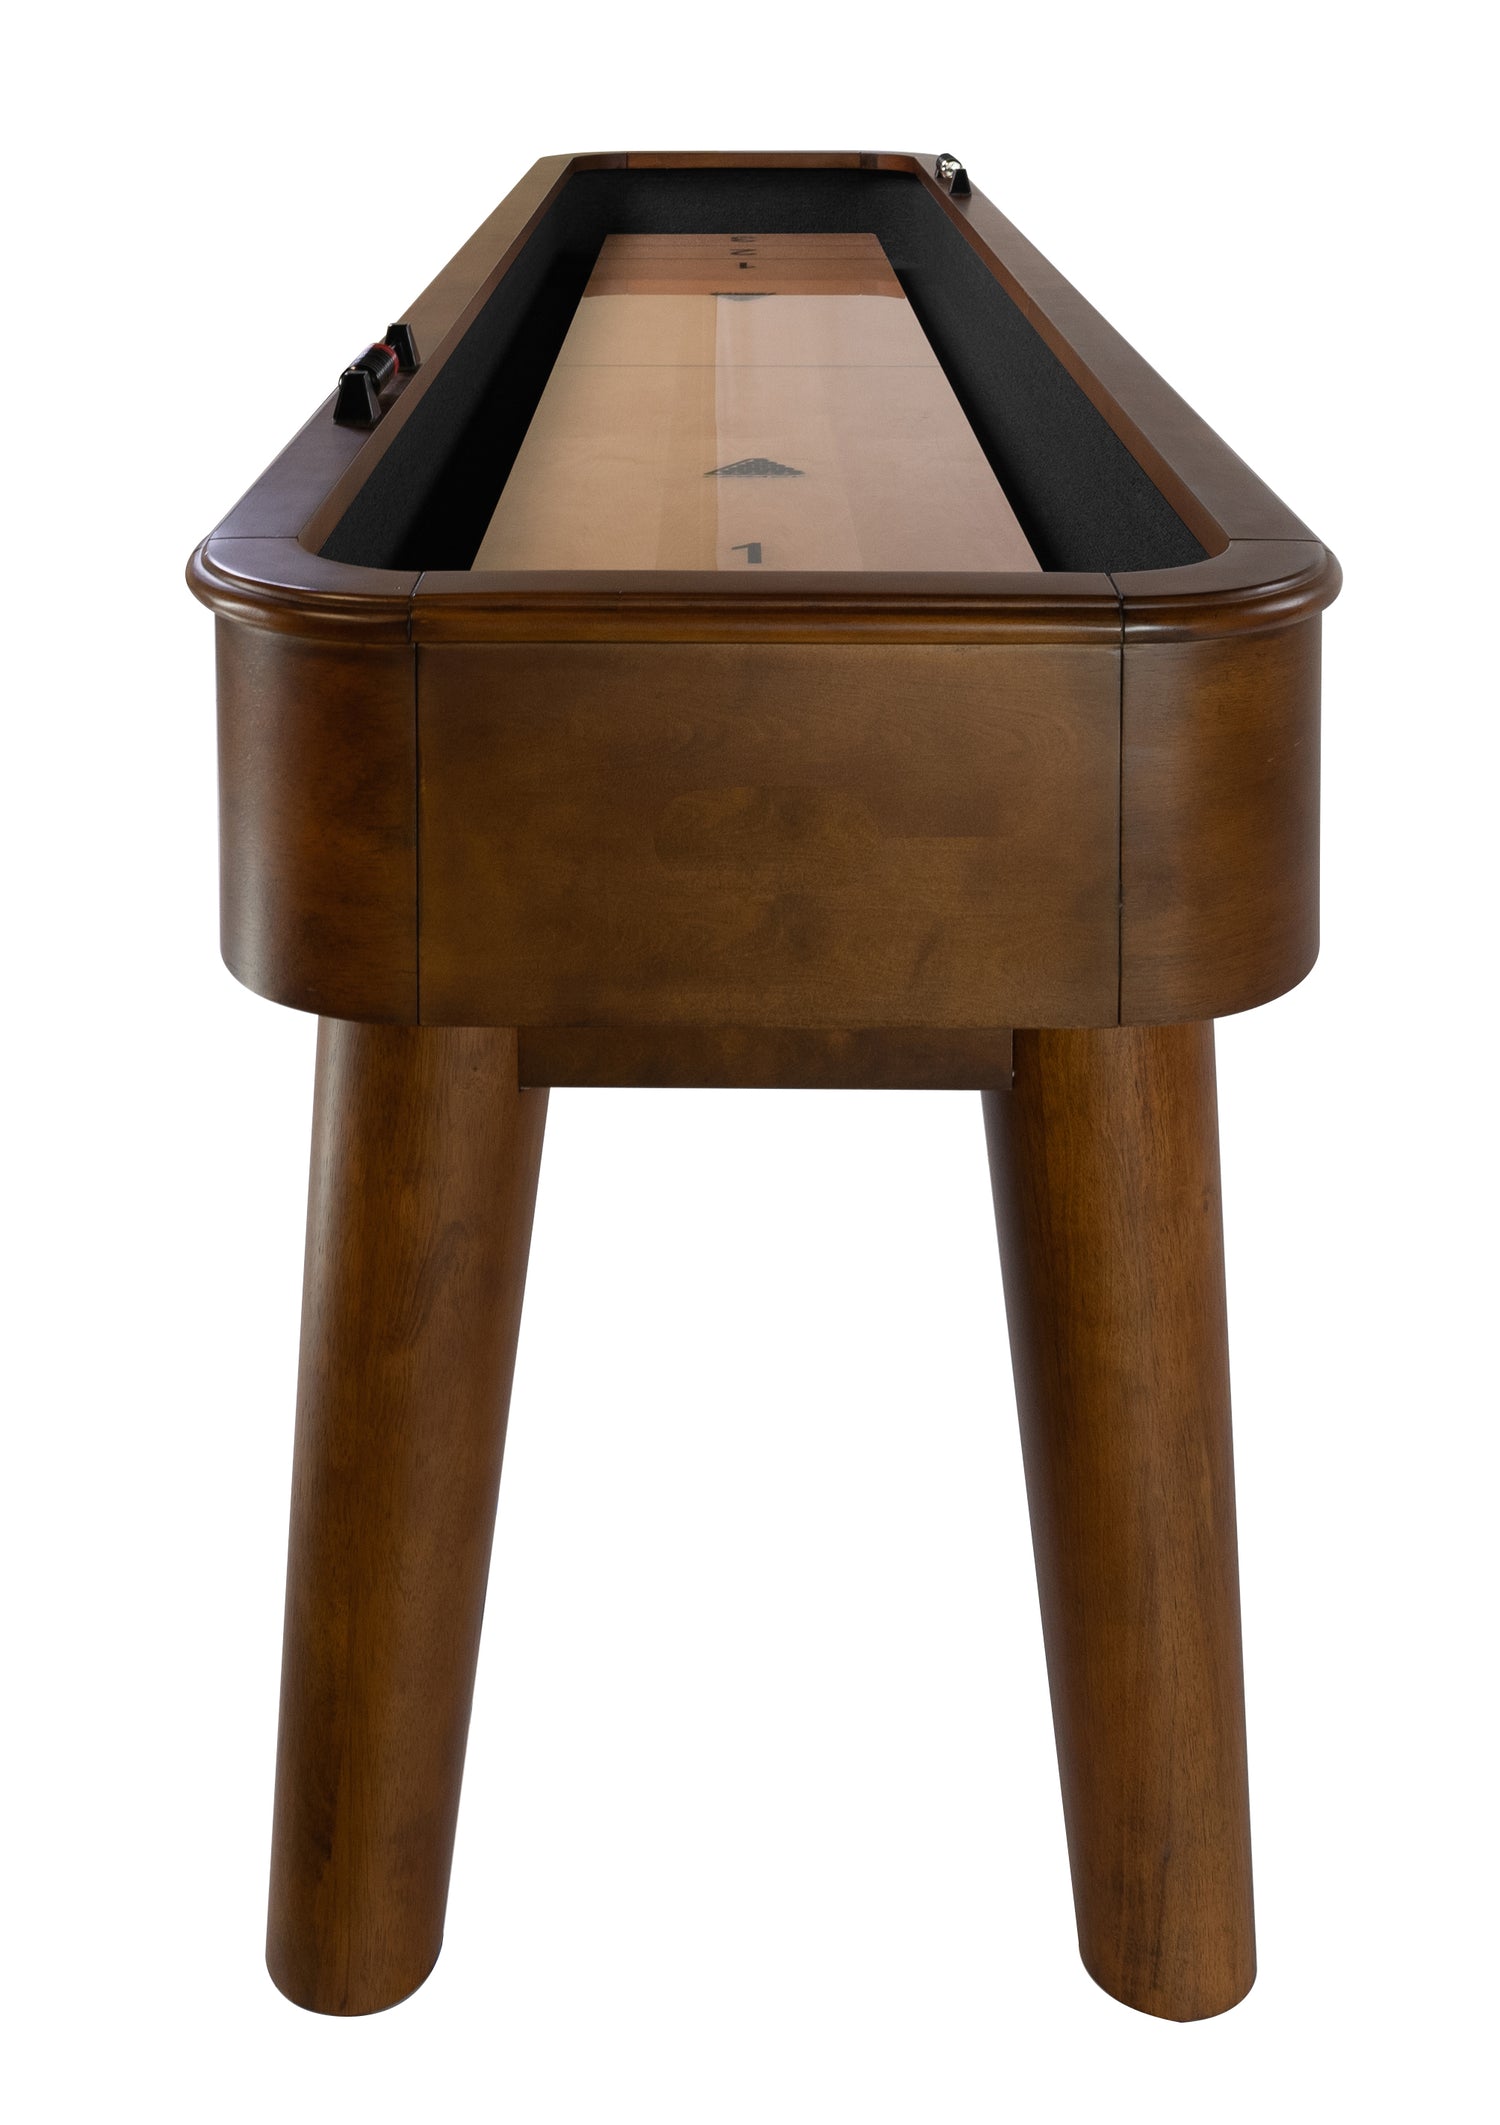 Legacy Billiards Collins 14 Ft Shuffleboard in Nutmeg Finish End View